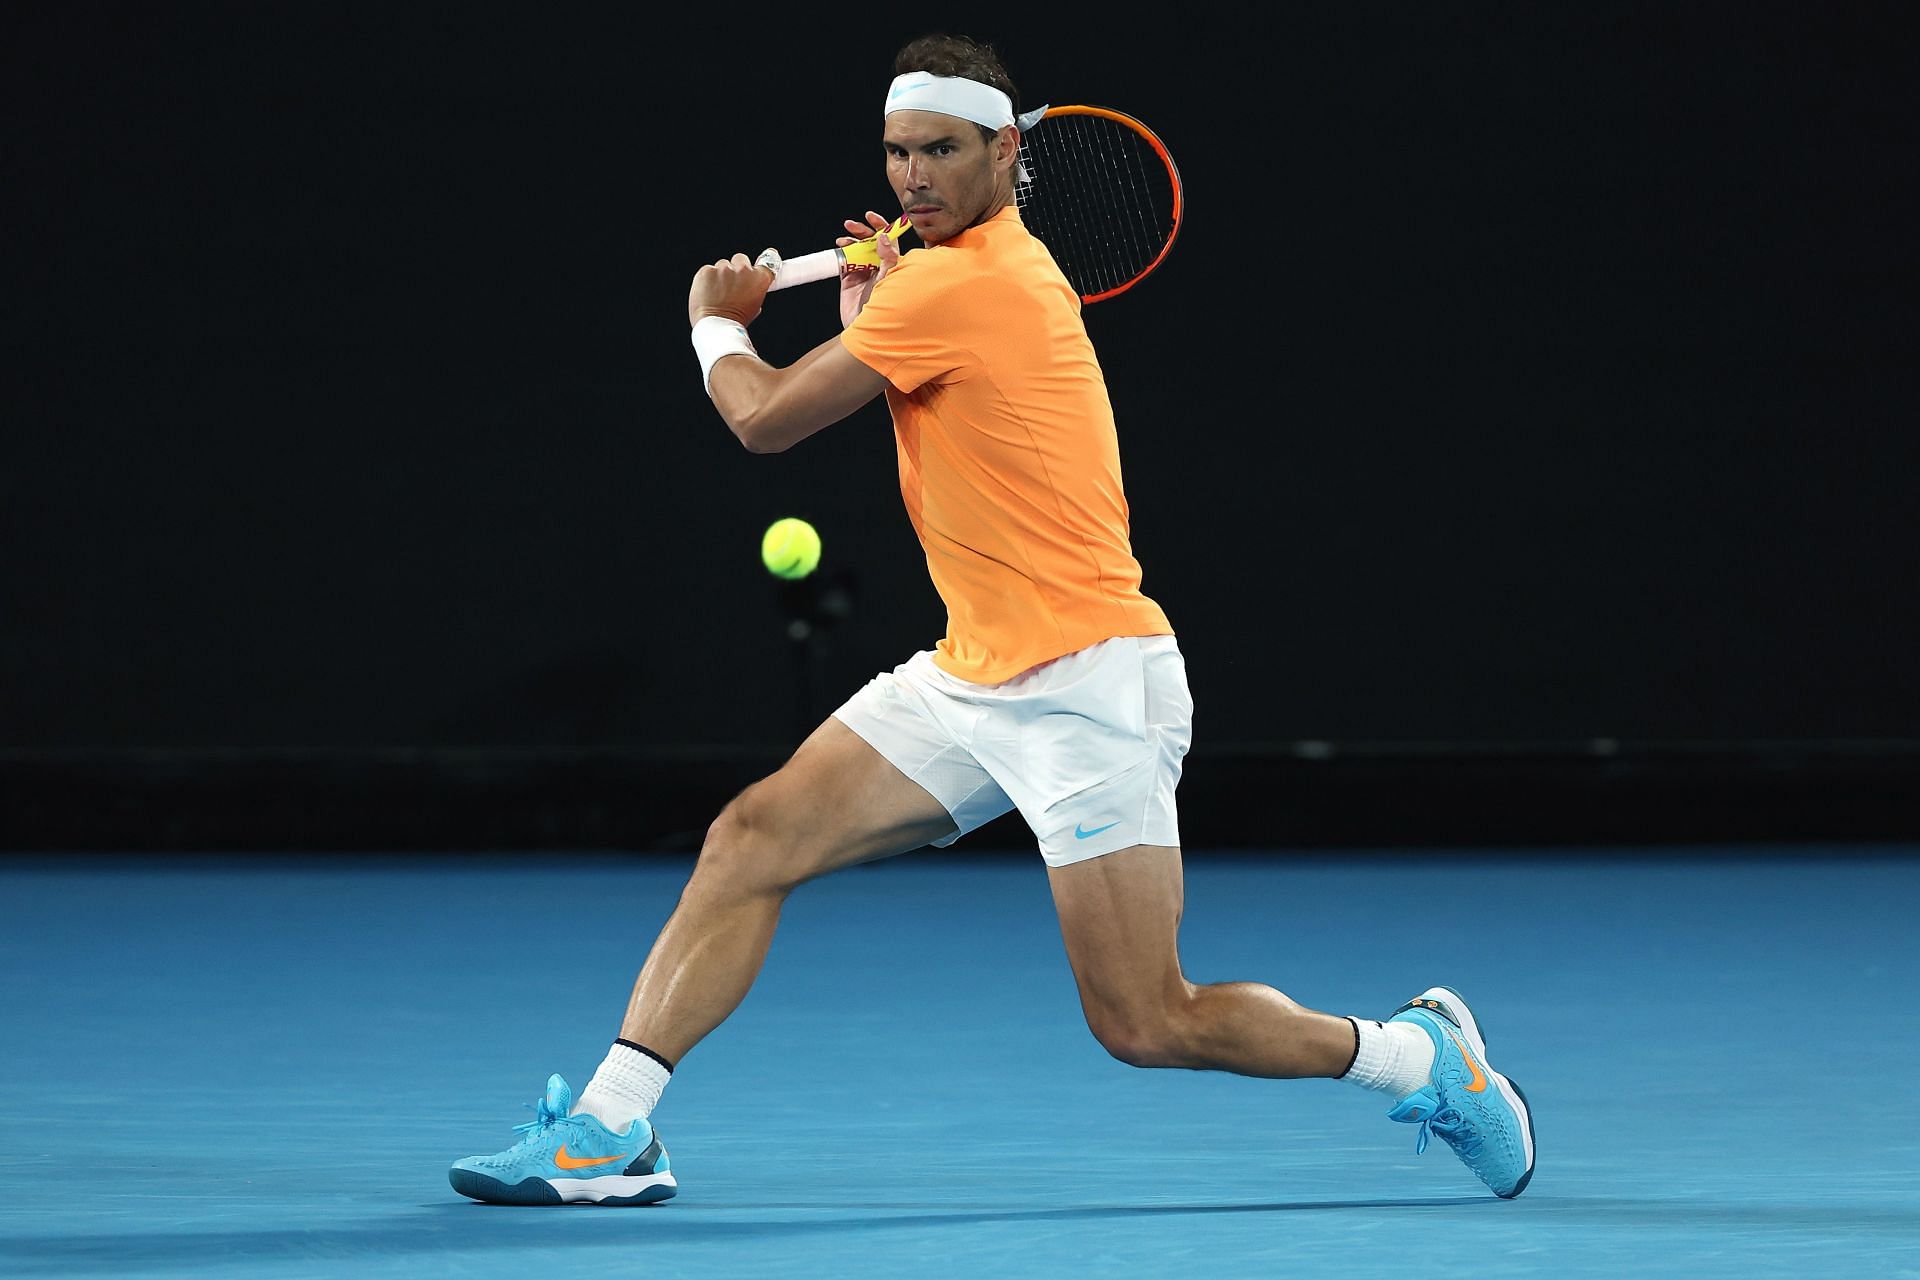 The Spaniard competes during the 2023 Australian Open.